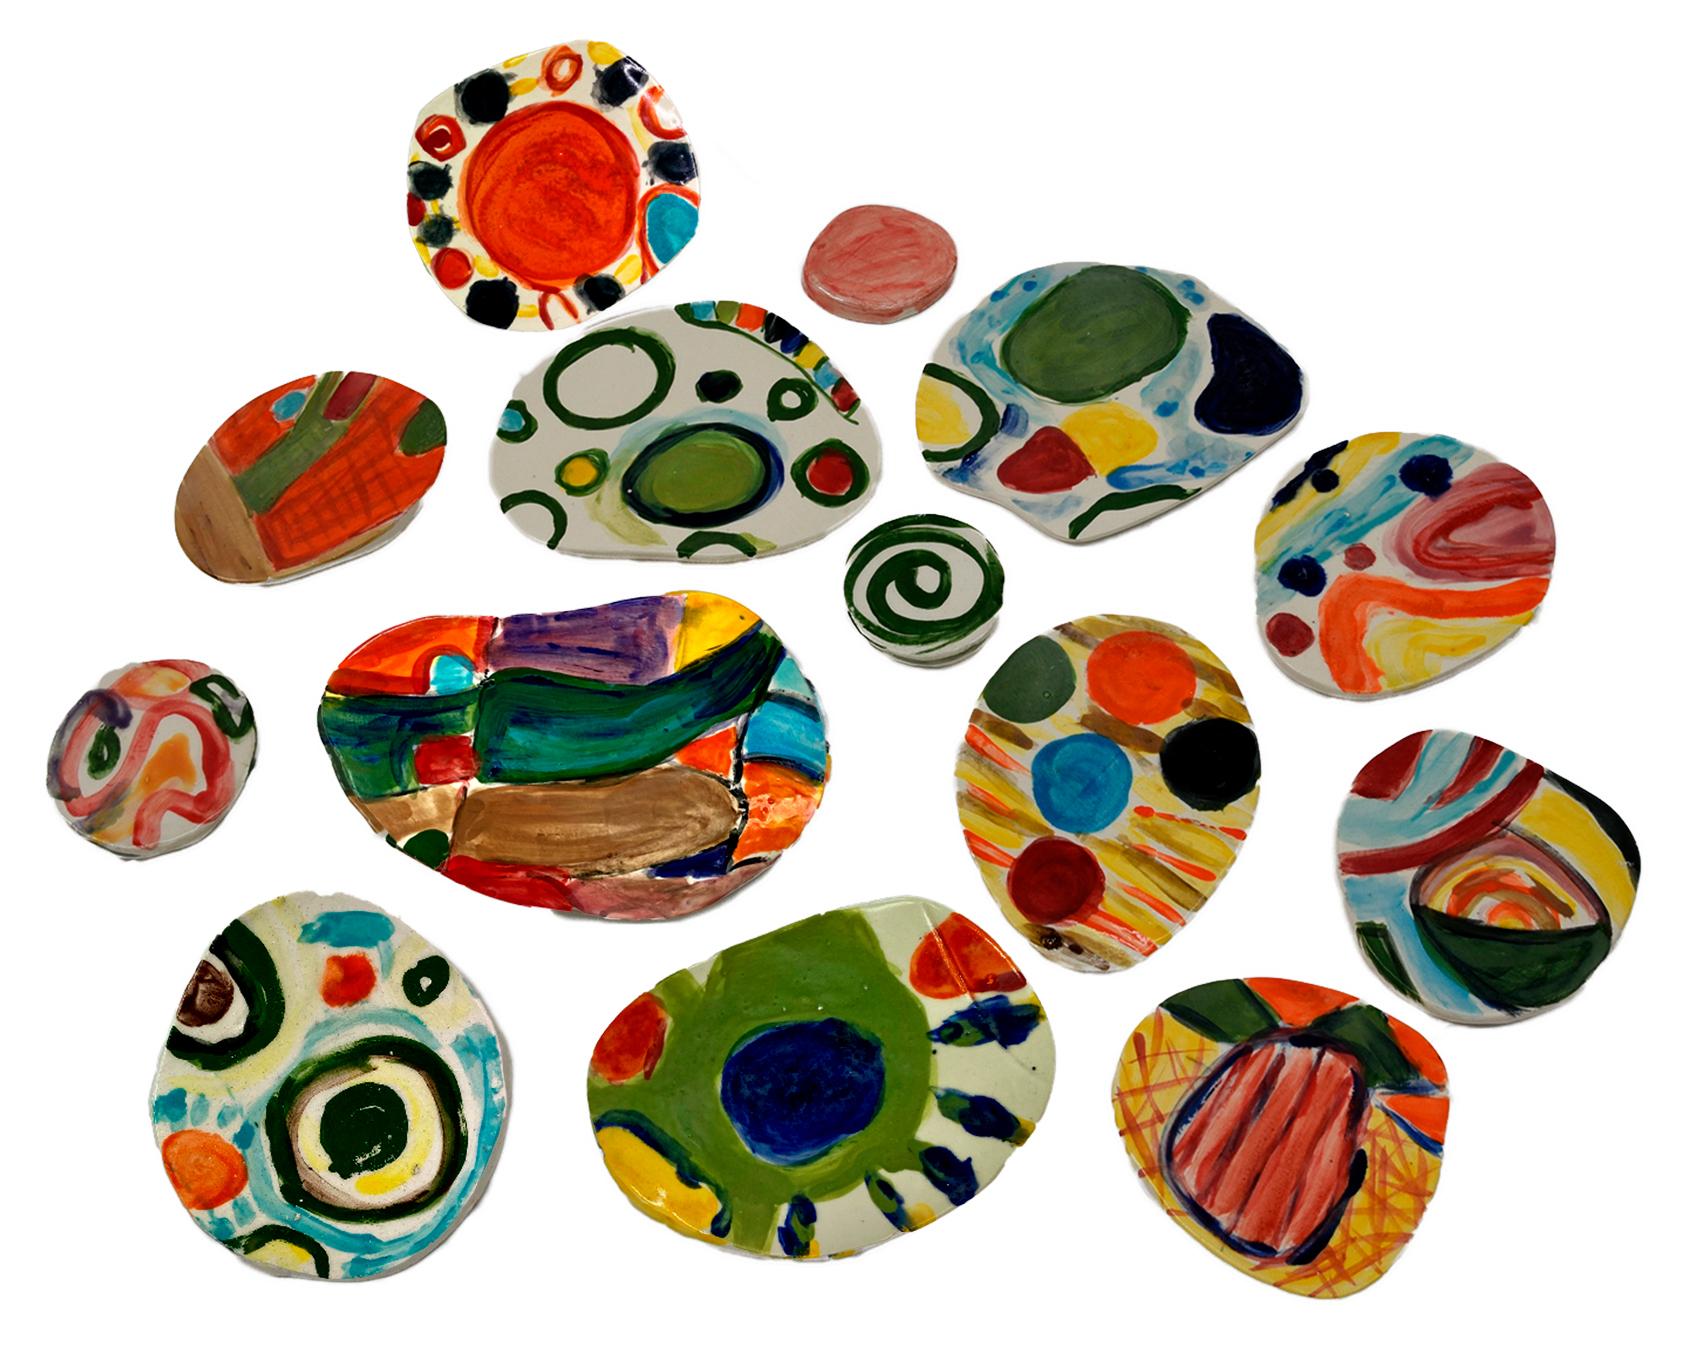 Charo Oquet Abstract Sculpture - Wall Abstract sculpture Untitled XXIII. Set of 14 Glazed Ceramic Discs